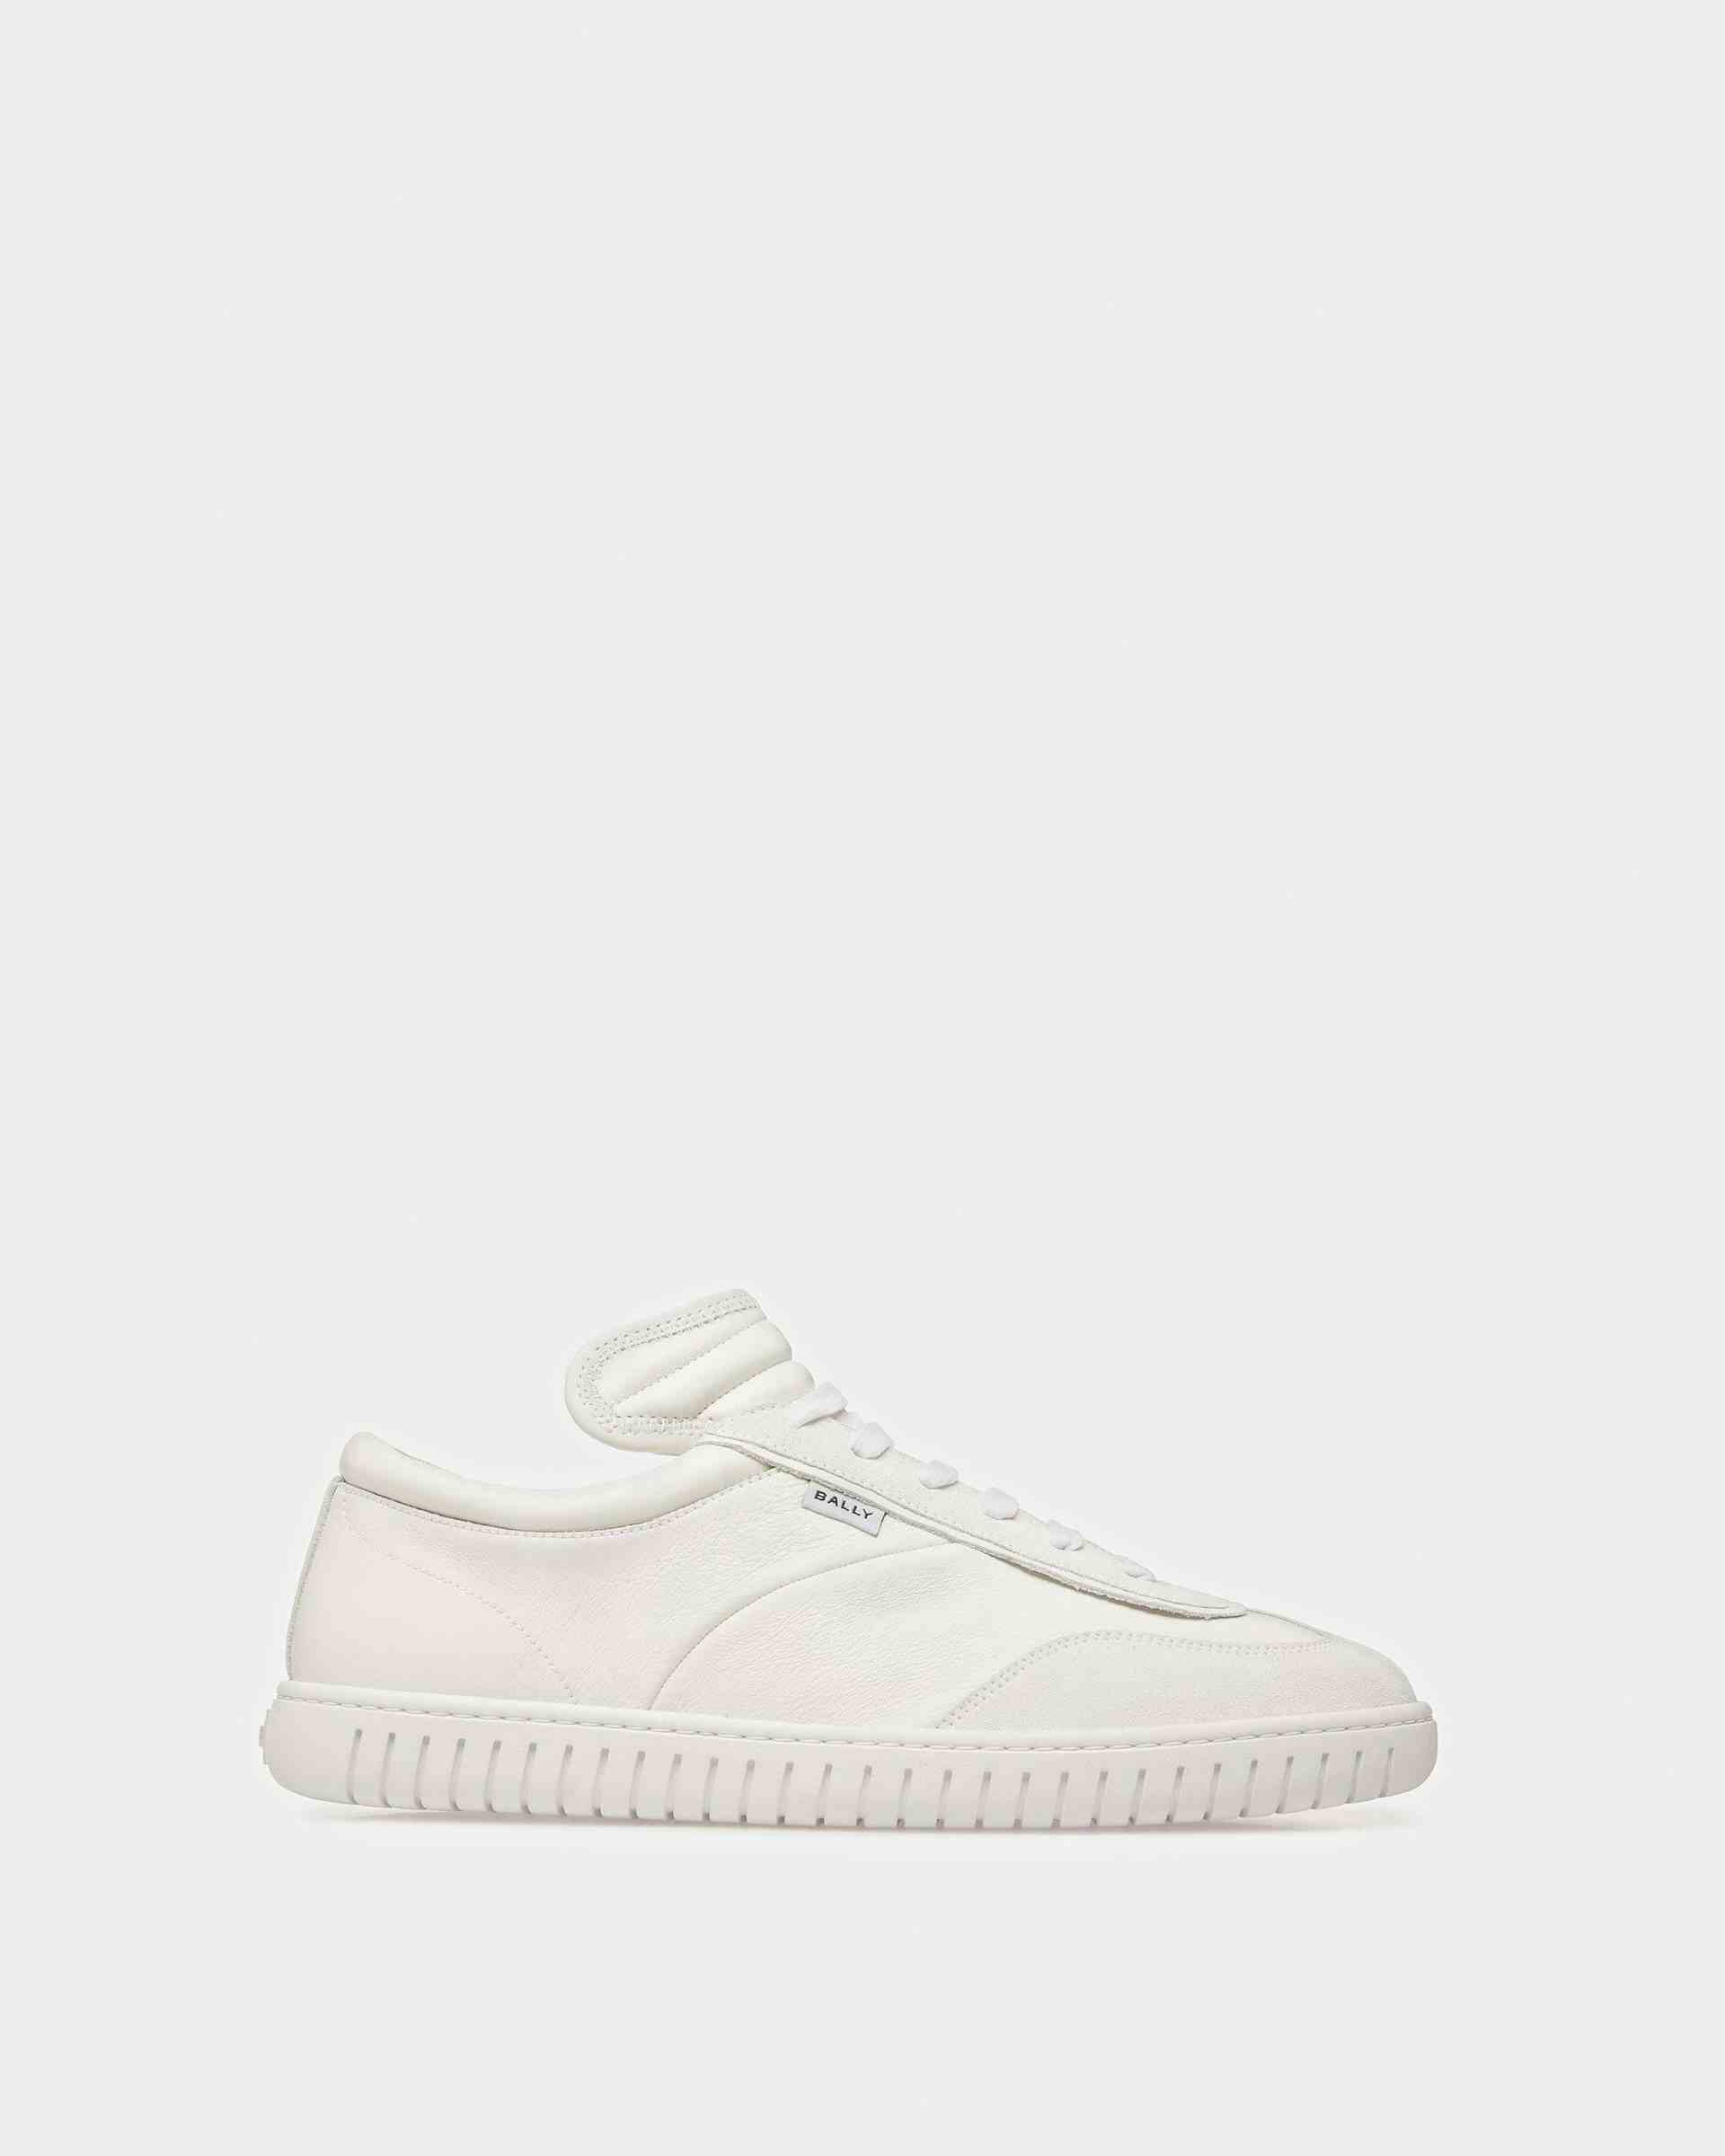 Player Sneakers In White Leather - Men's - Bally